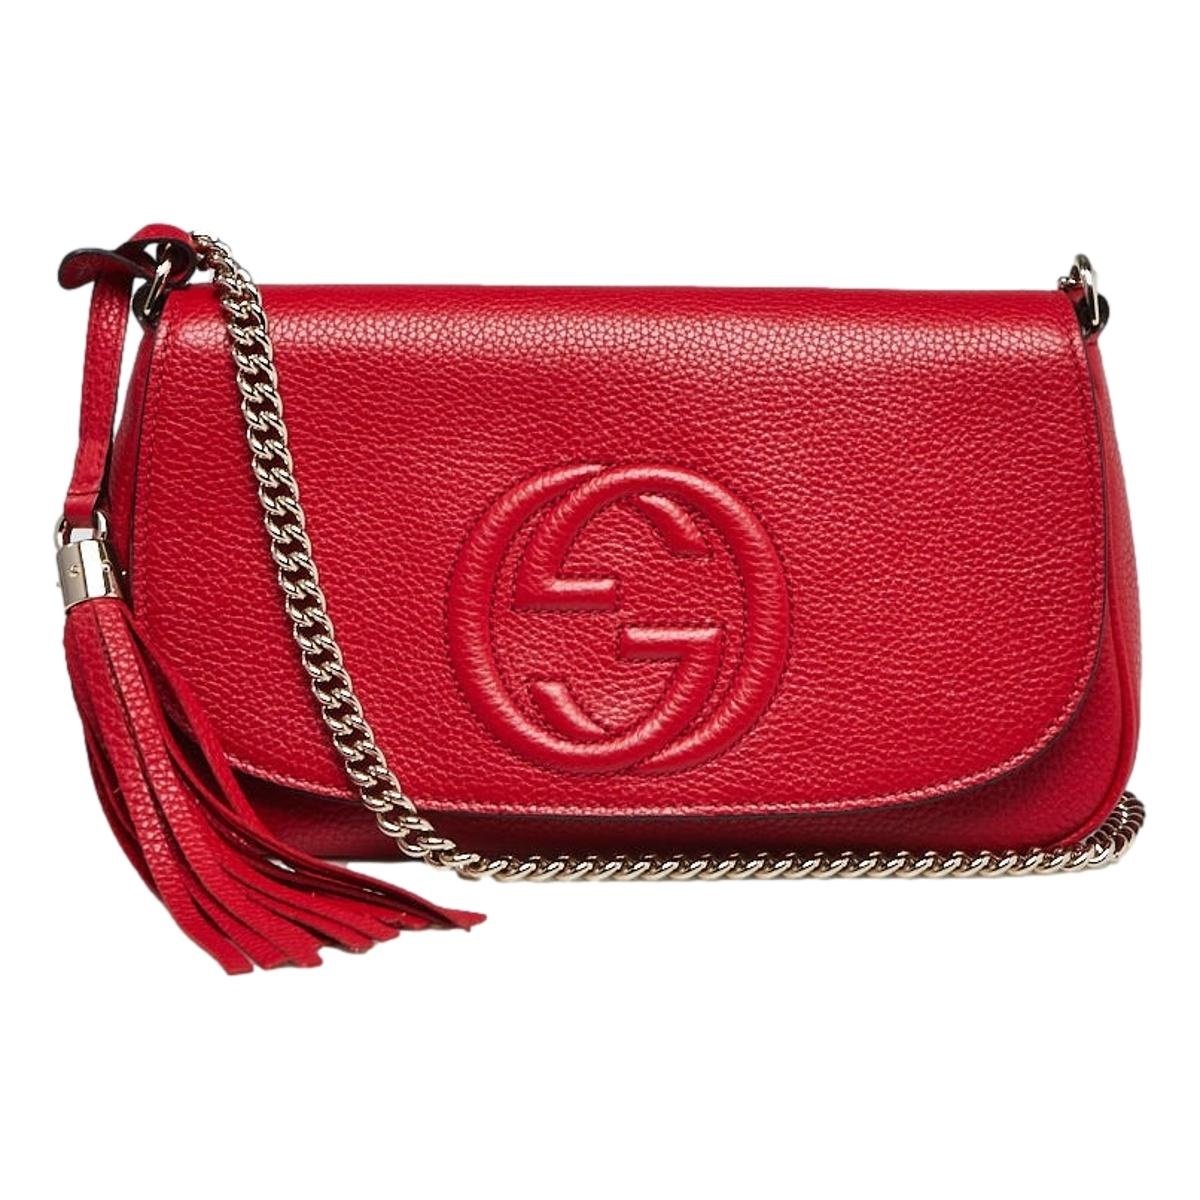 Black Blondie leather cross-body bag | Gucci | MATCHES UK